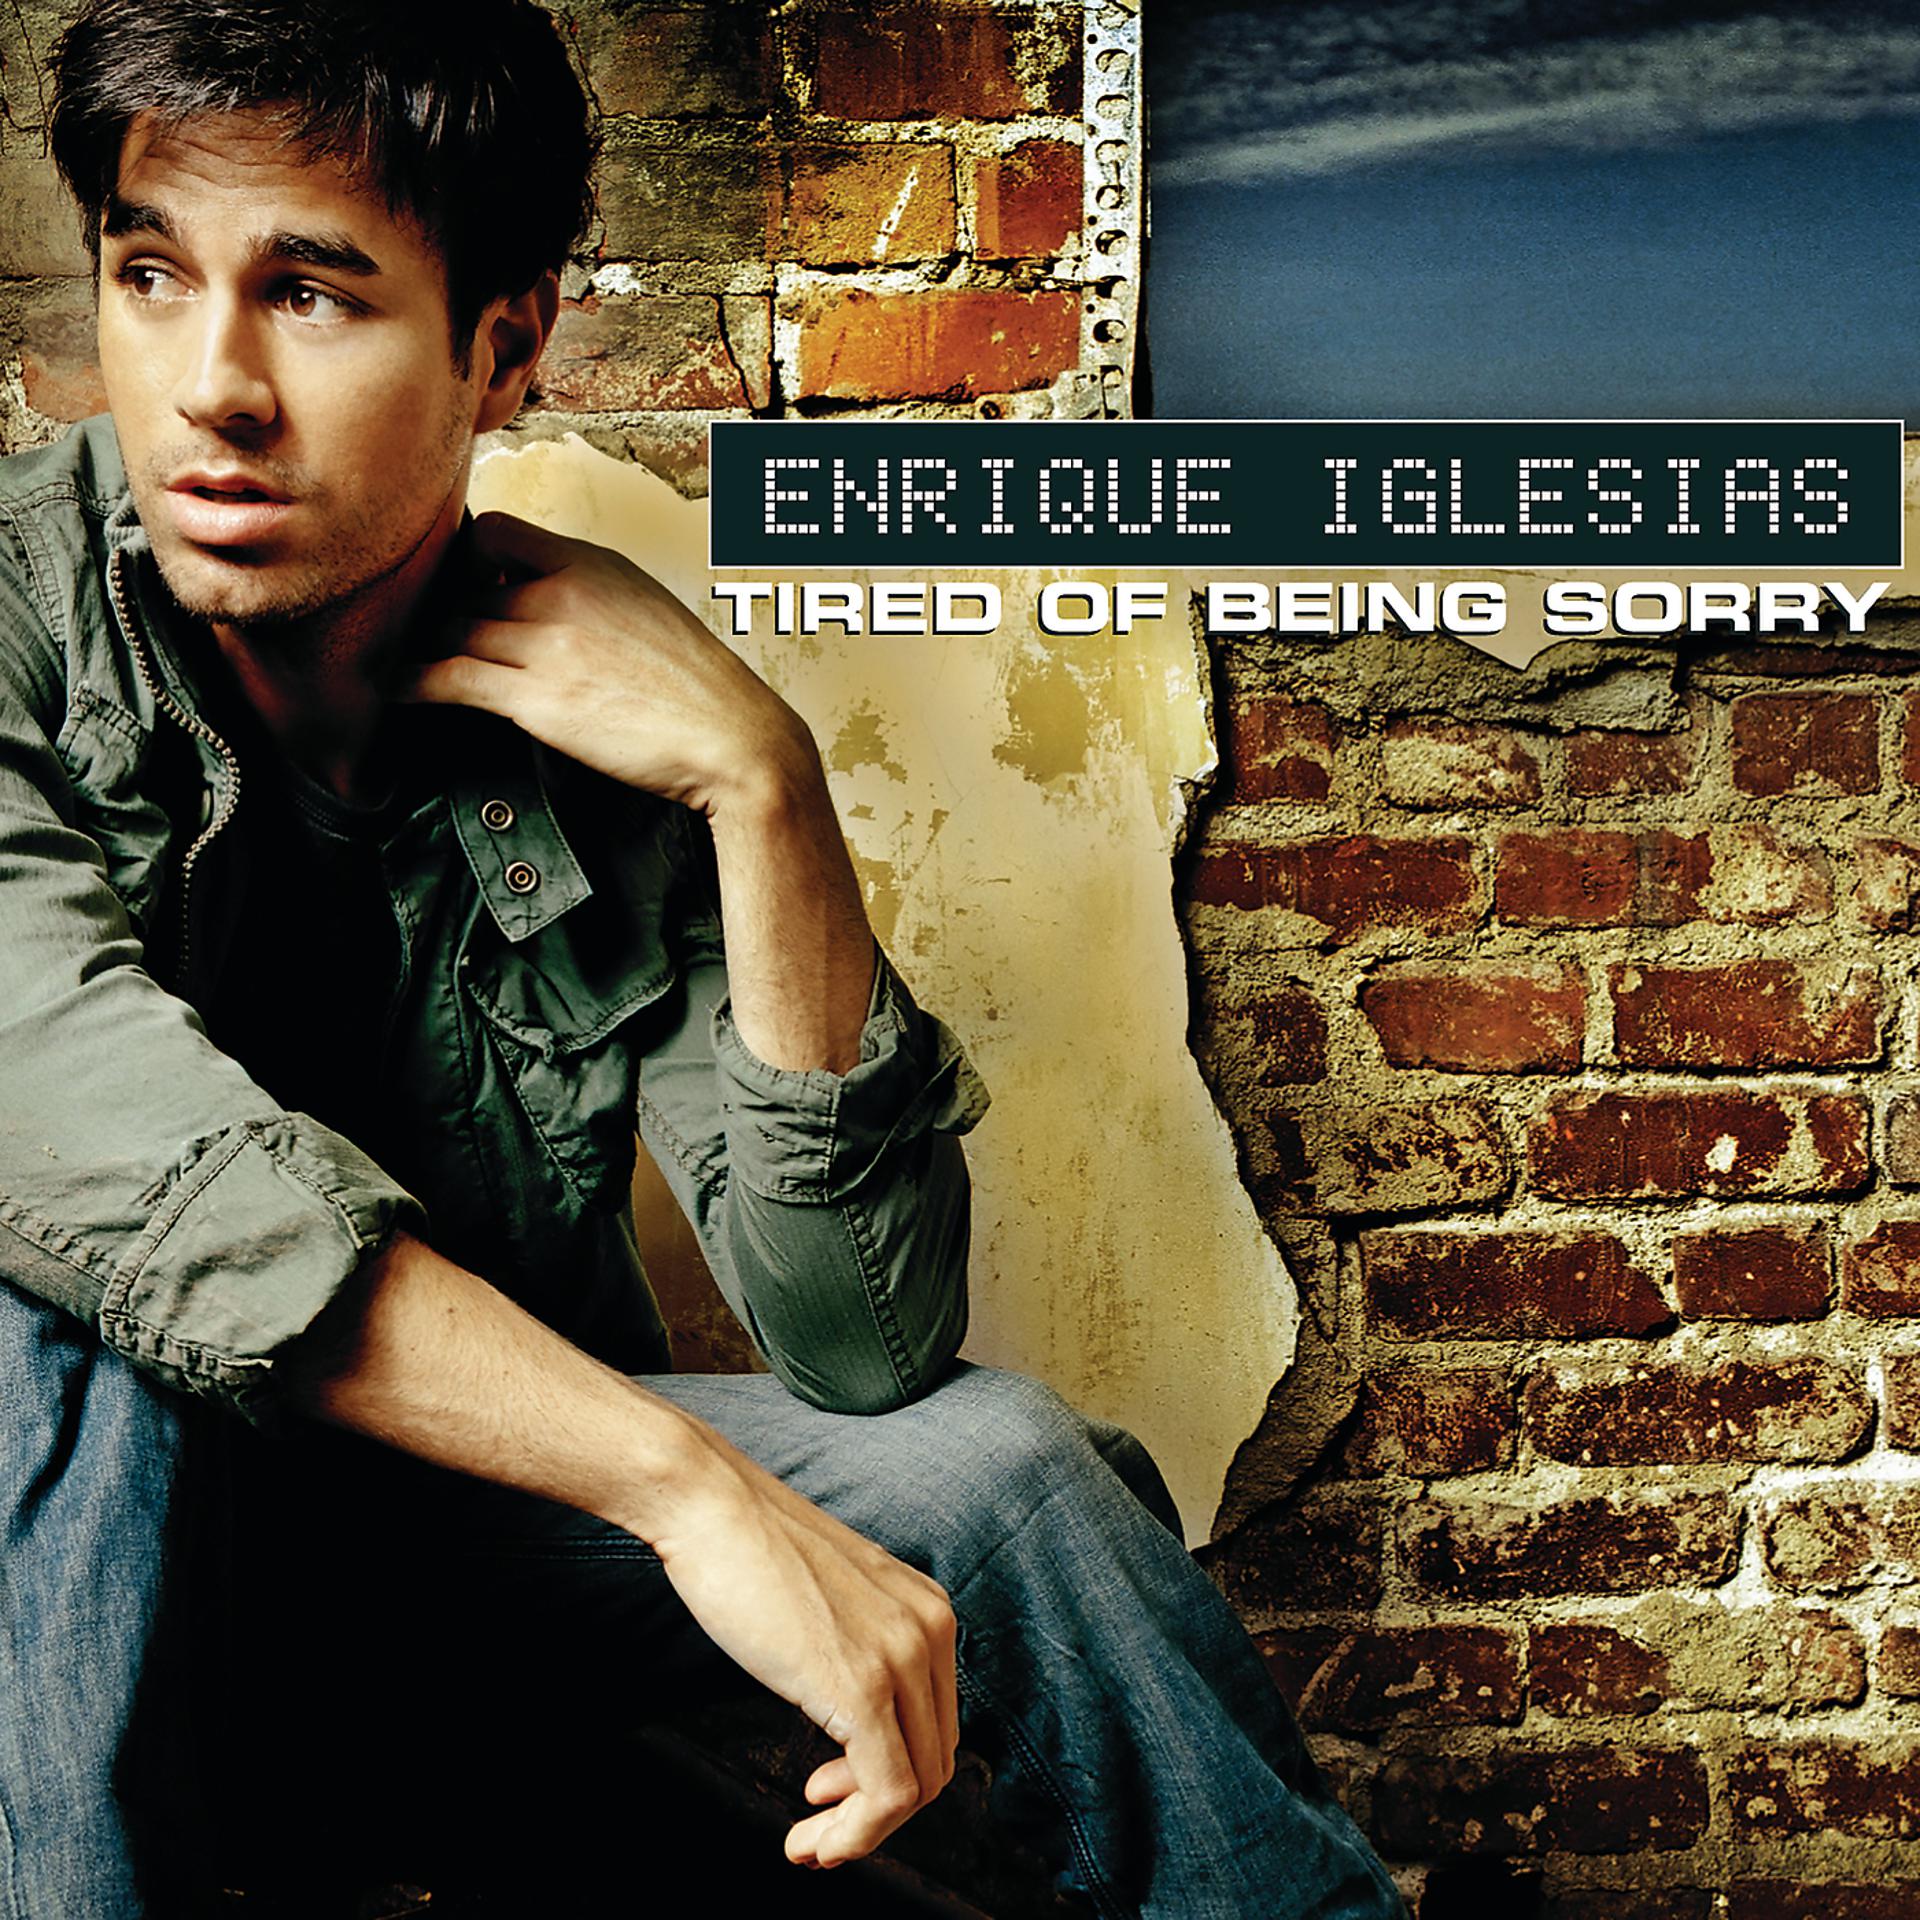 Being sorry enrique iglesias. Tired of being sorry Энрике Иглесиас. Энрике Иглесиас 2007 tired. Enrique Iglesias - tired of being sorry обложка. Энрике Иглесиас обложка.